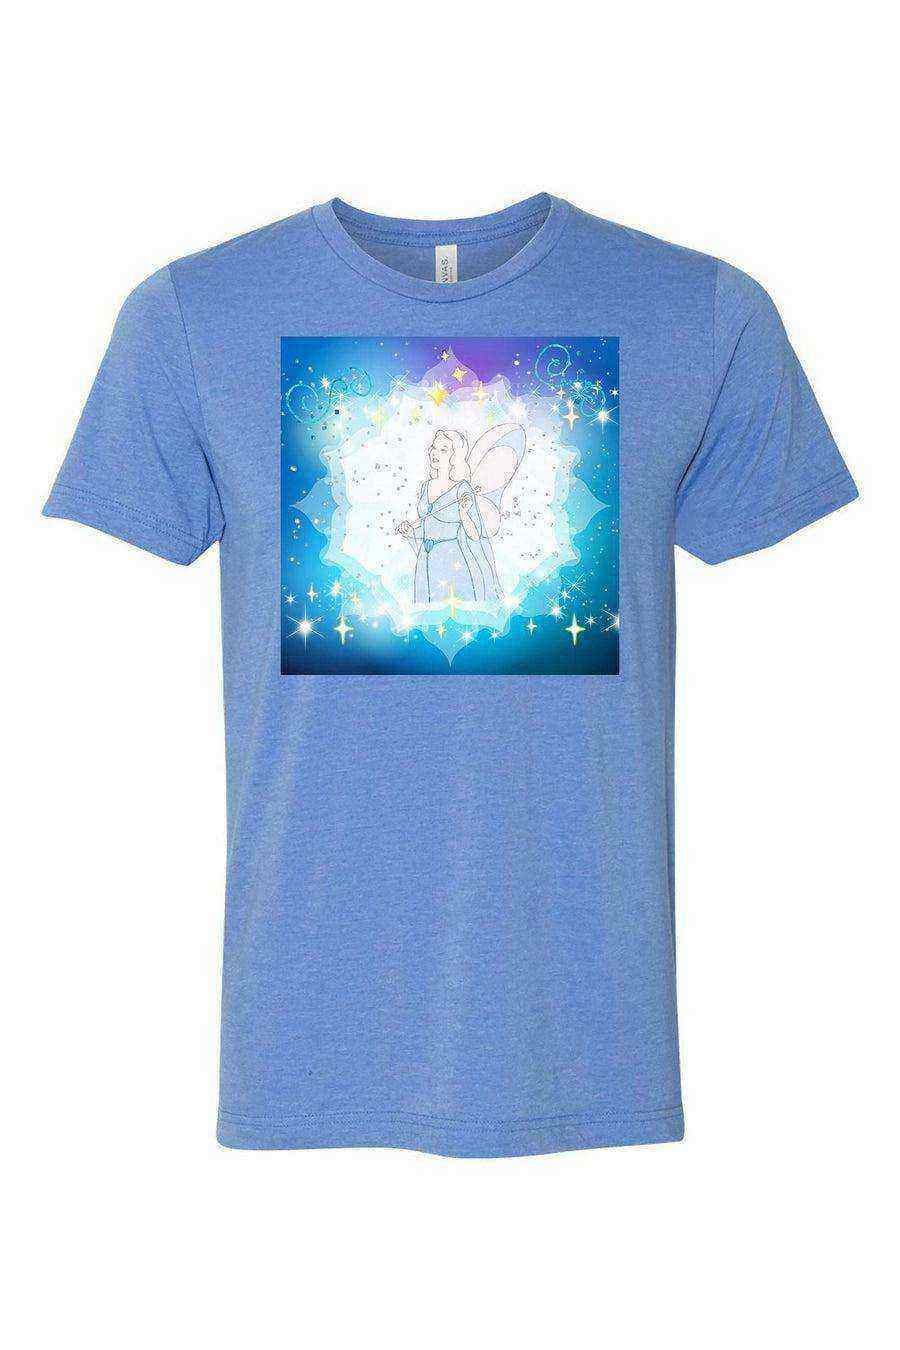 Toddler | Blue Fairy Shirt | When You Wish Upon A Star - Dylan's Tees